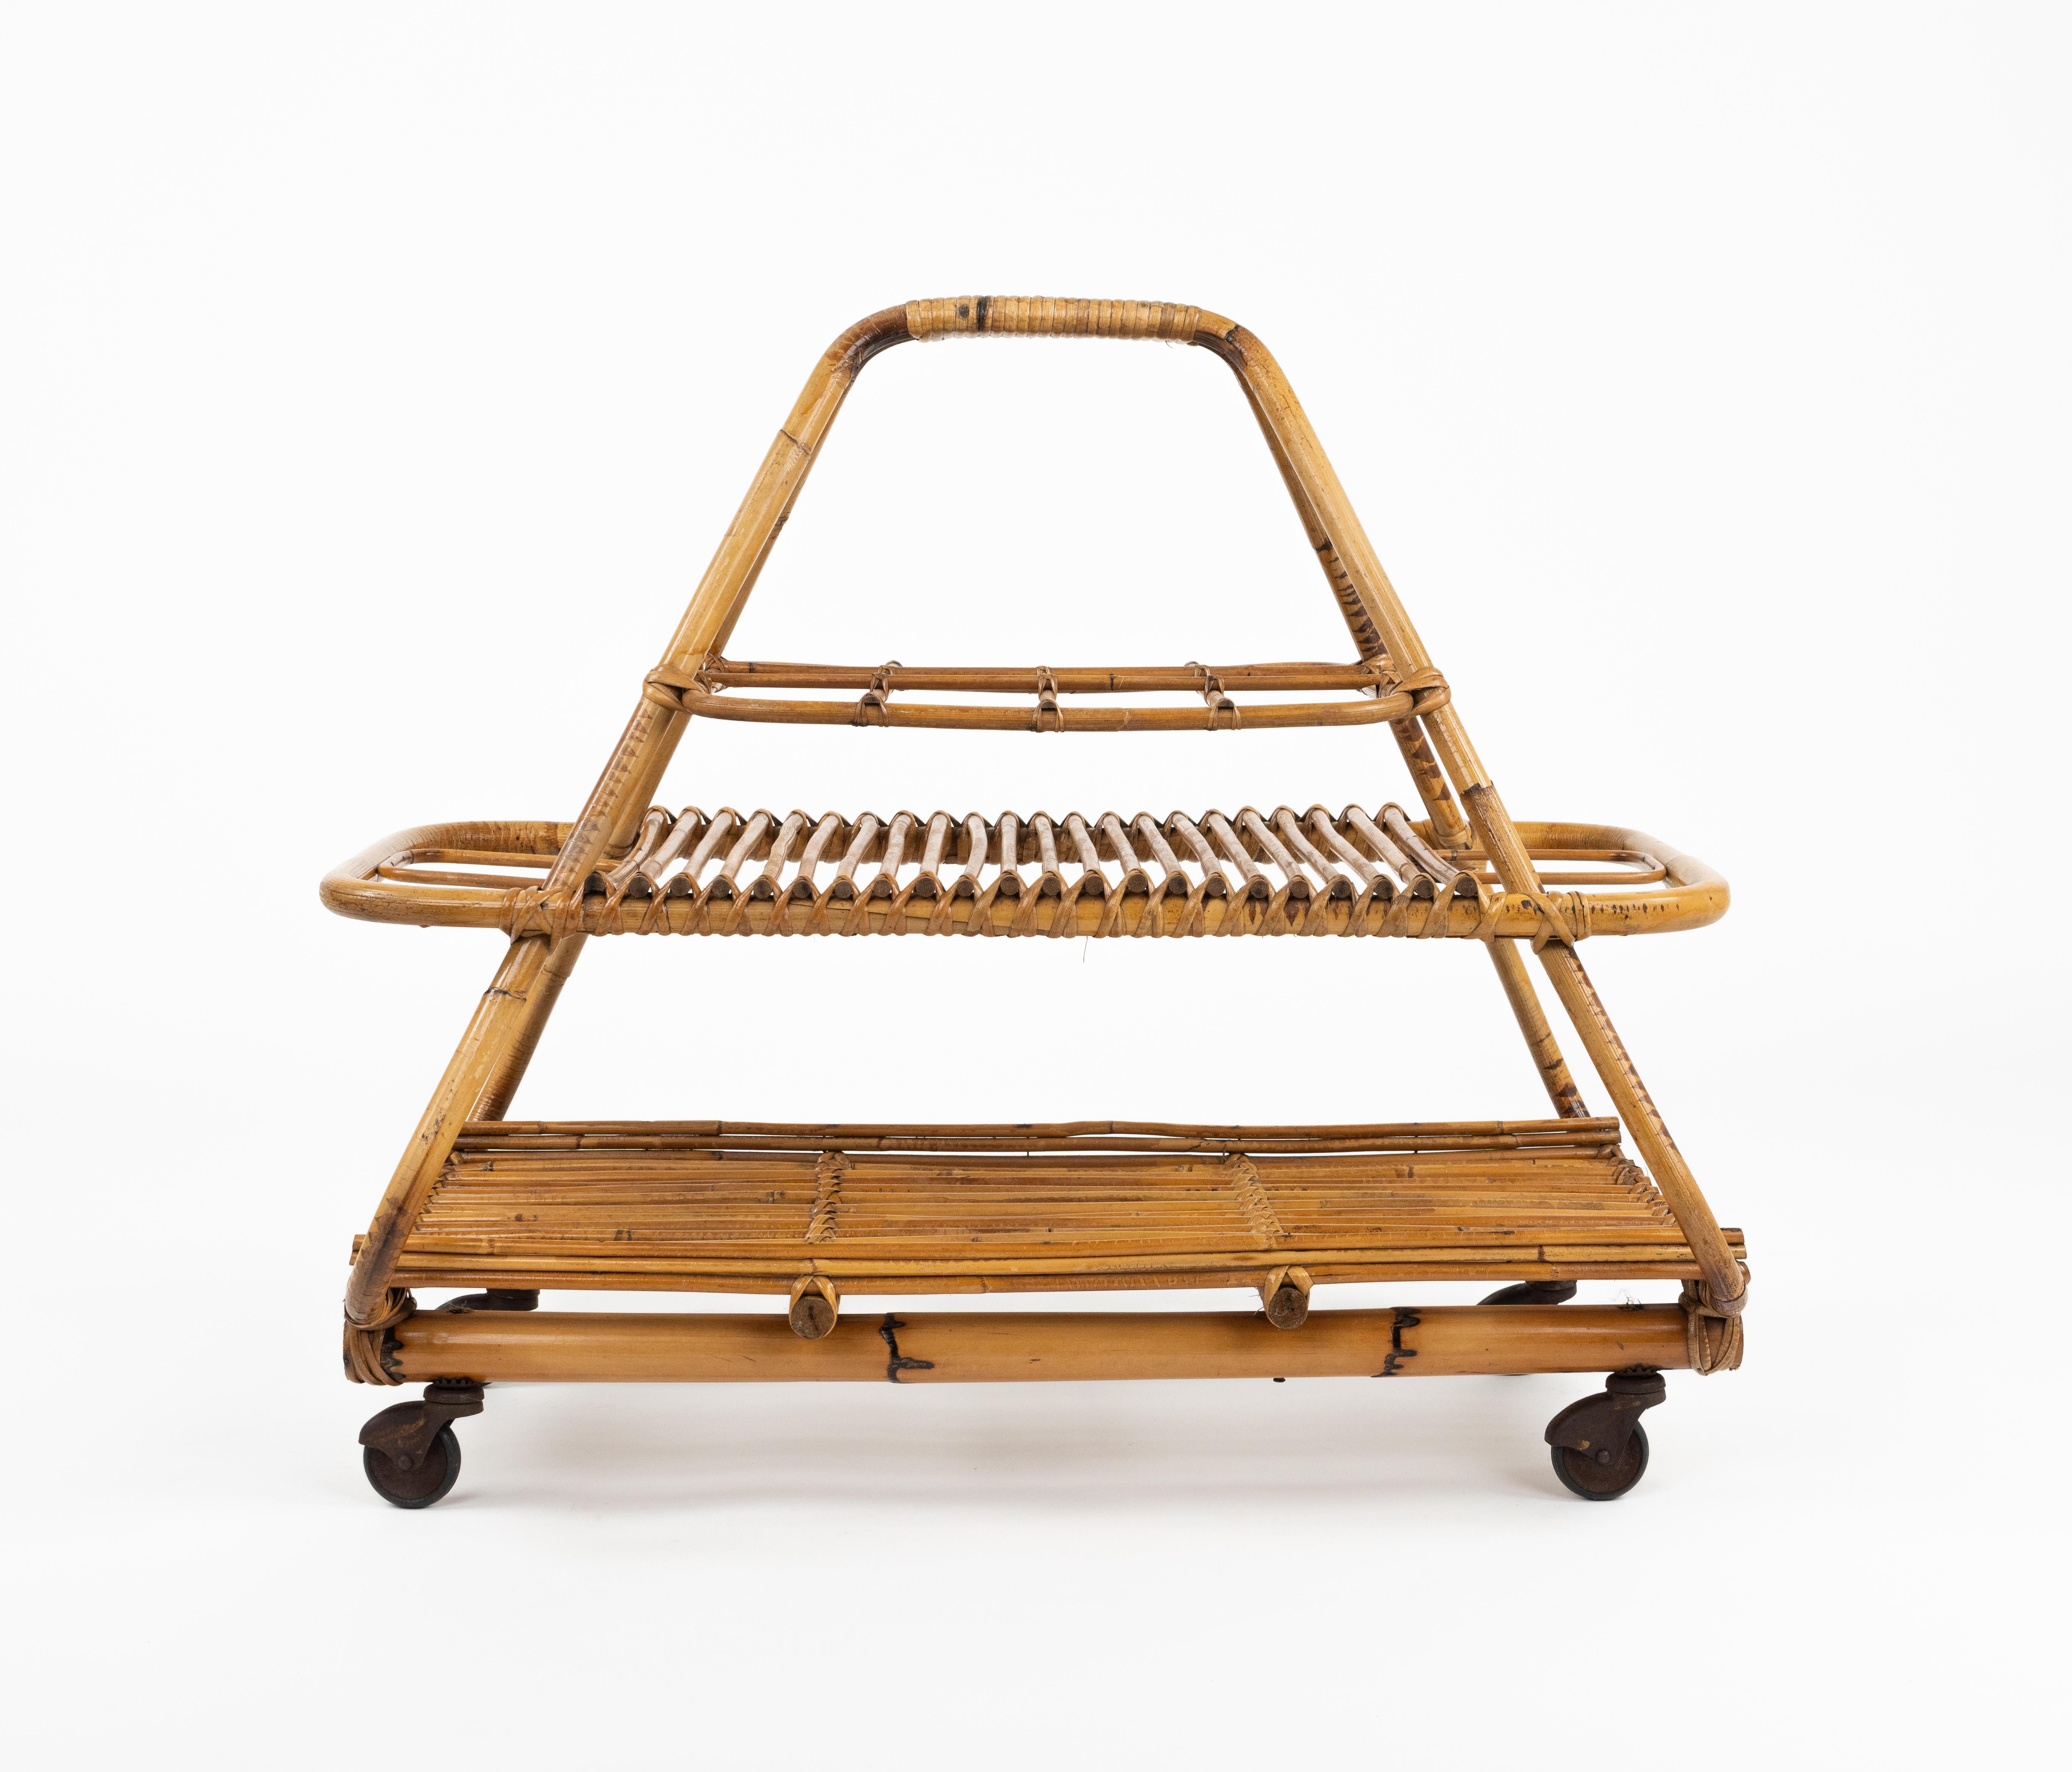 Midcentury Serving Bar Cart with bottle holder in Rattan and Bamboo, Italy 1960s For Sale 3